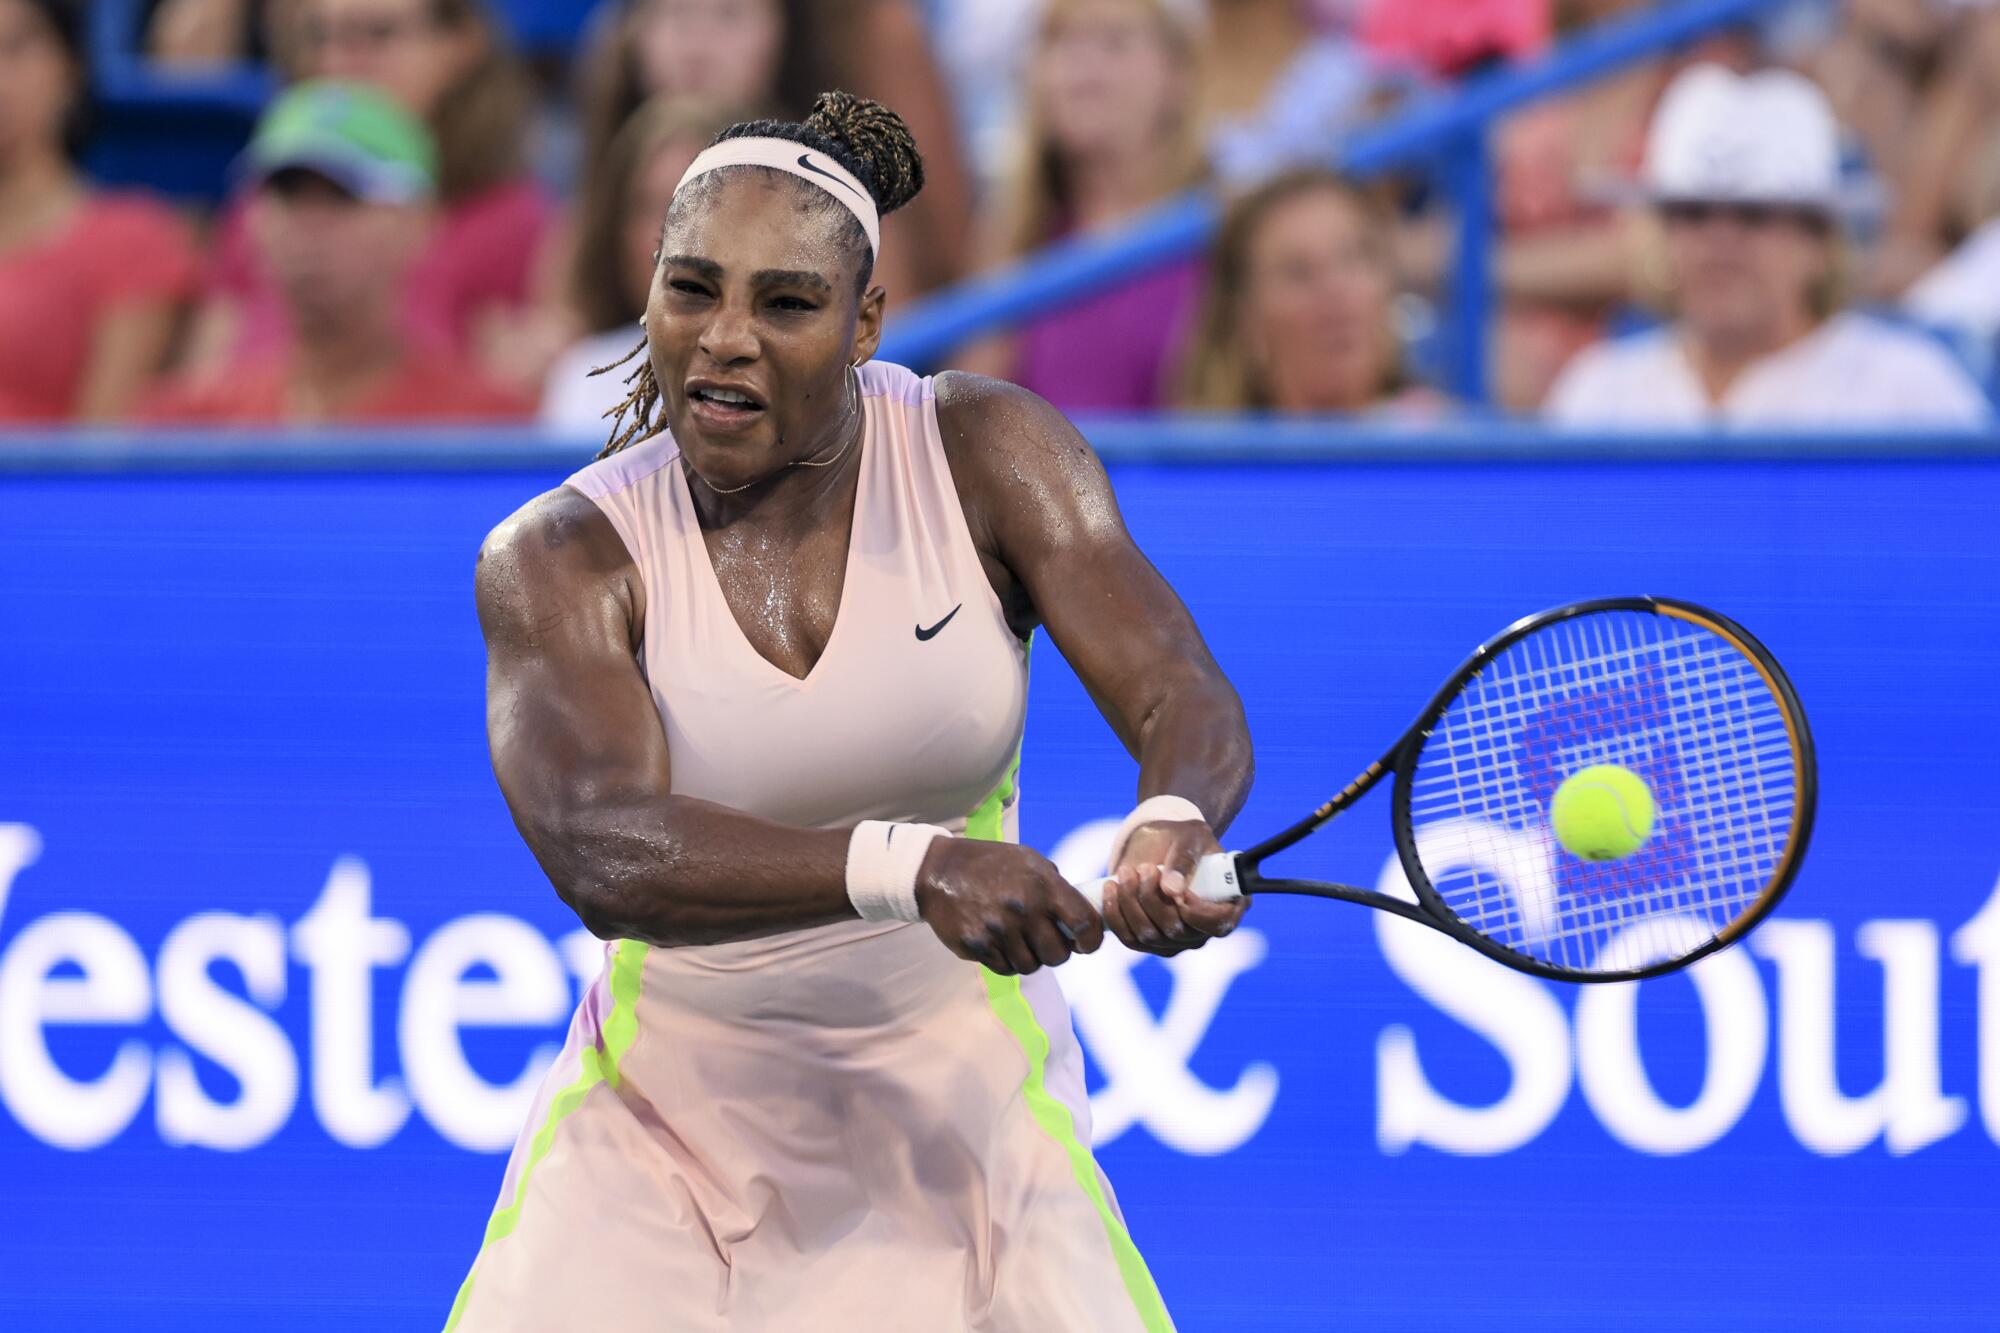 Serena Williams hits a backhand during her match against Emma Raducanu at the Western & Southern Open on Aug. 16.